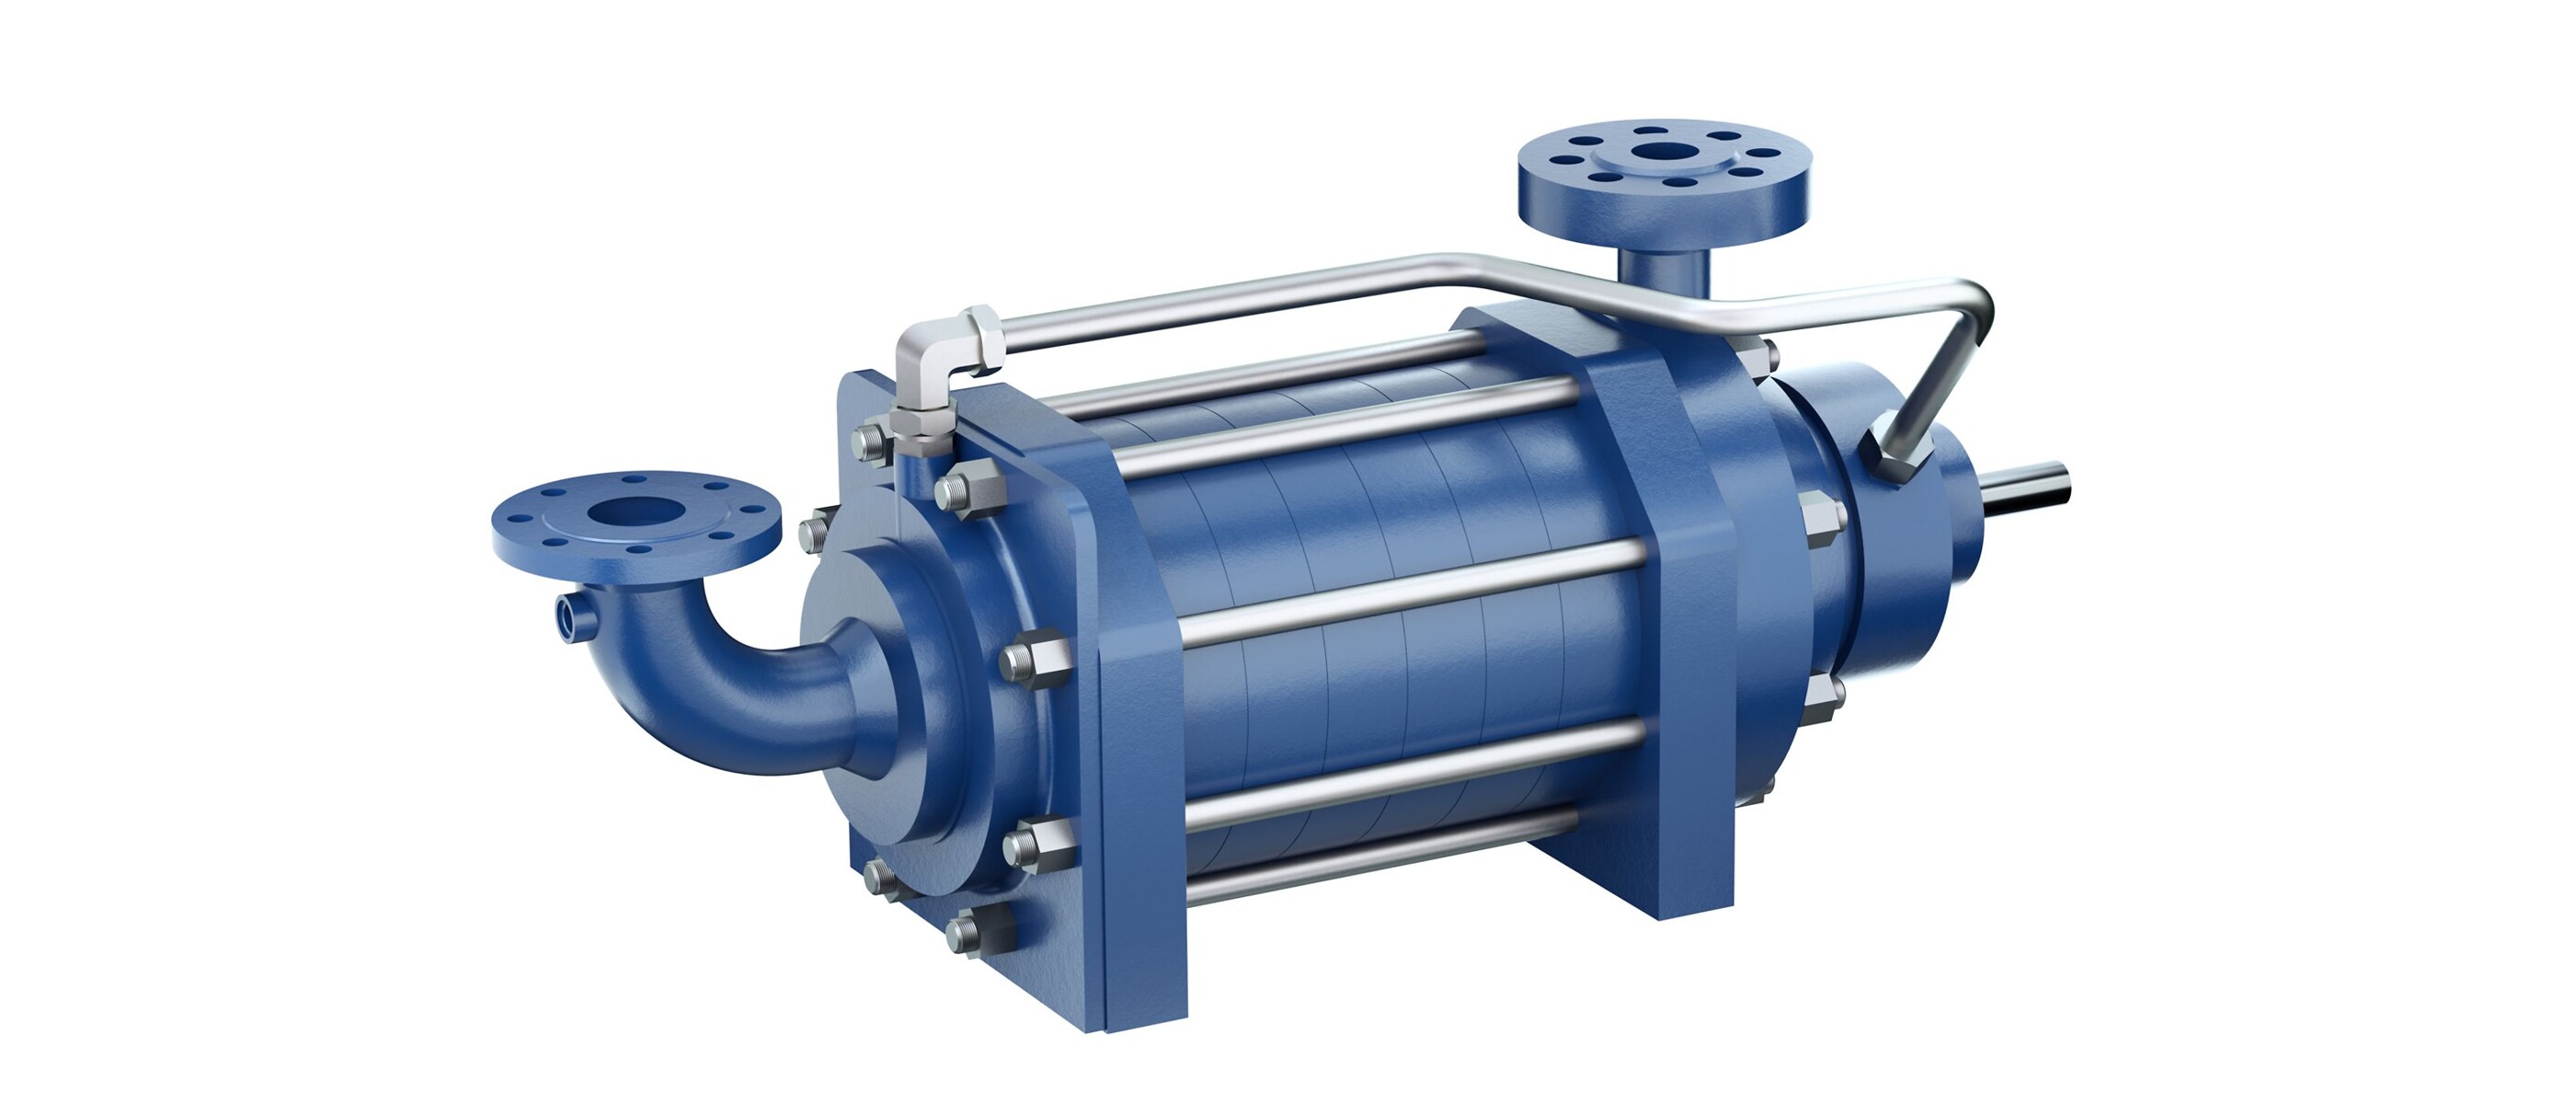 The new HGM-S – A new boiler feed pump for power stations fired by regenerative fuels